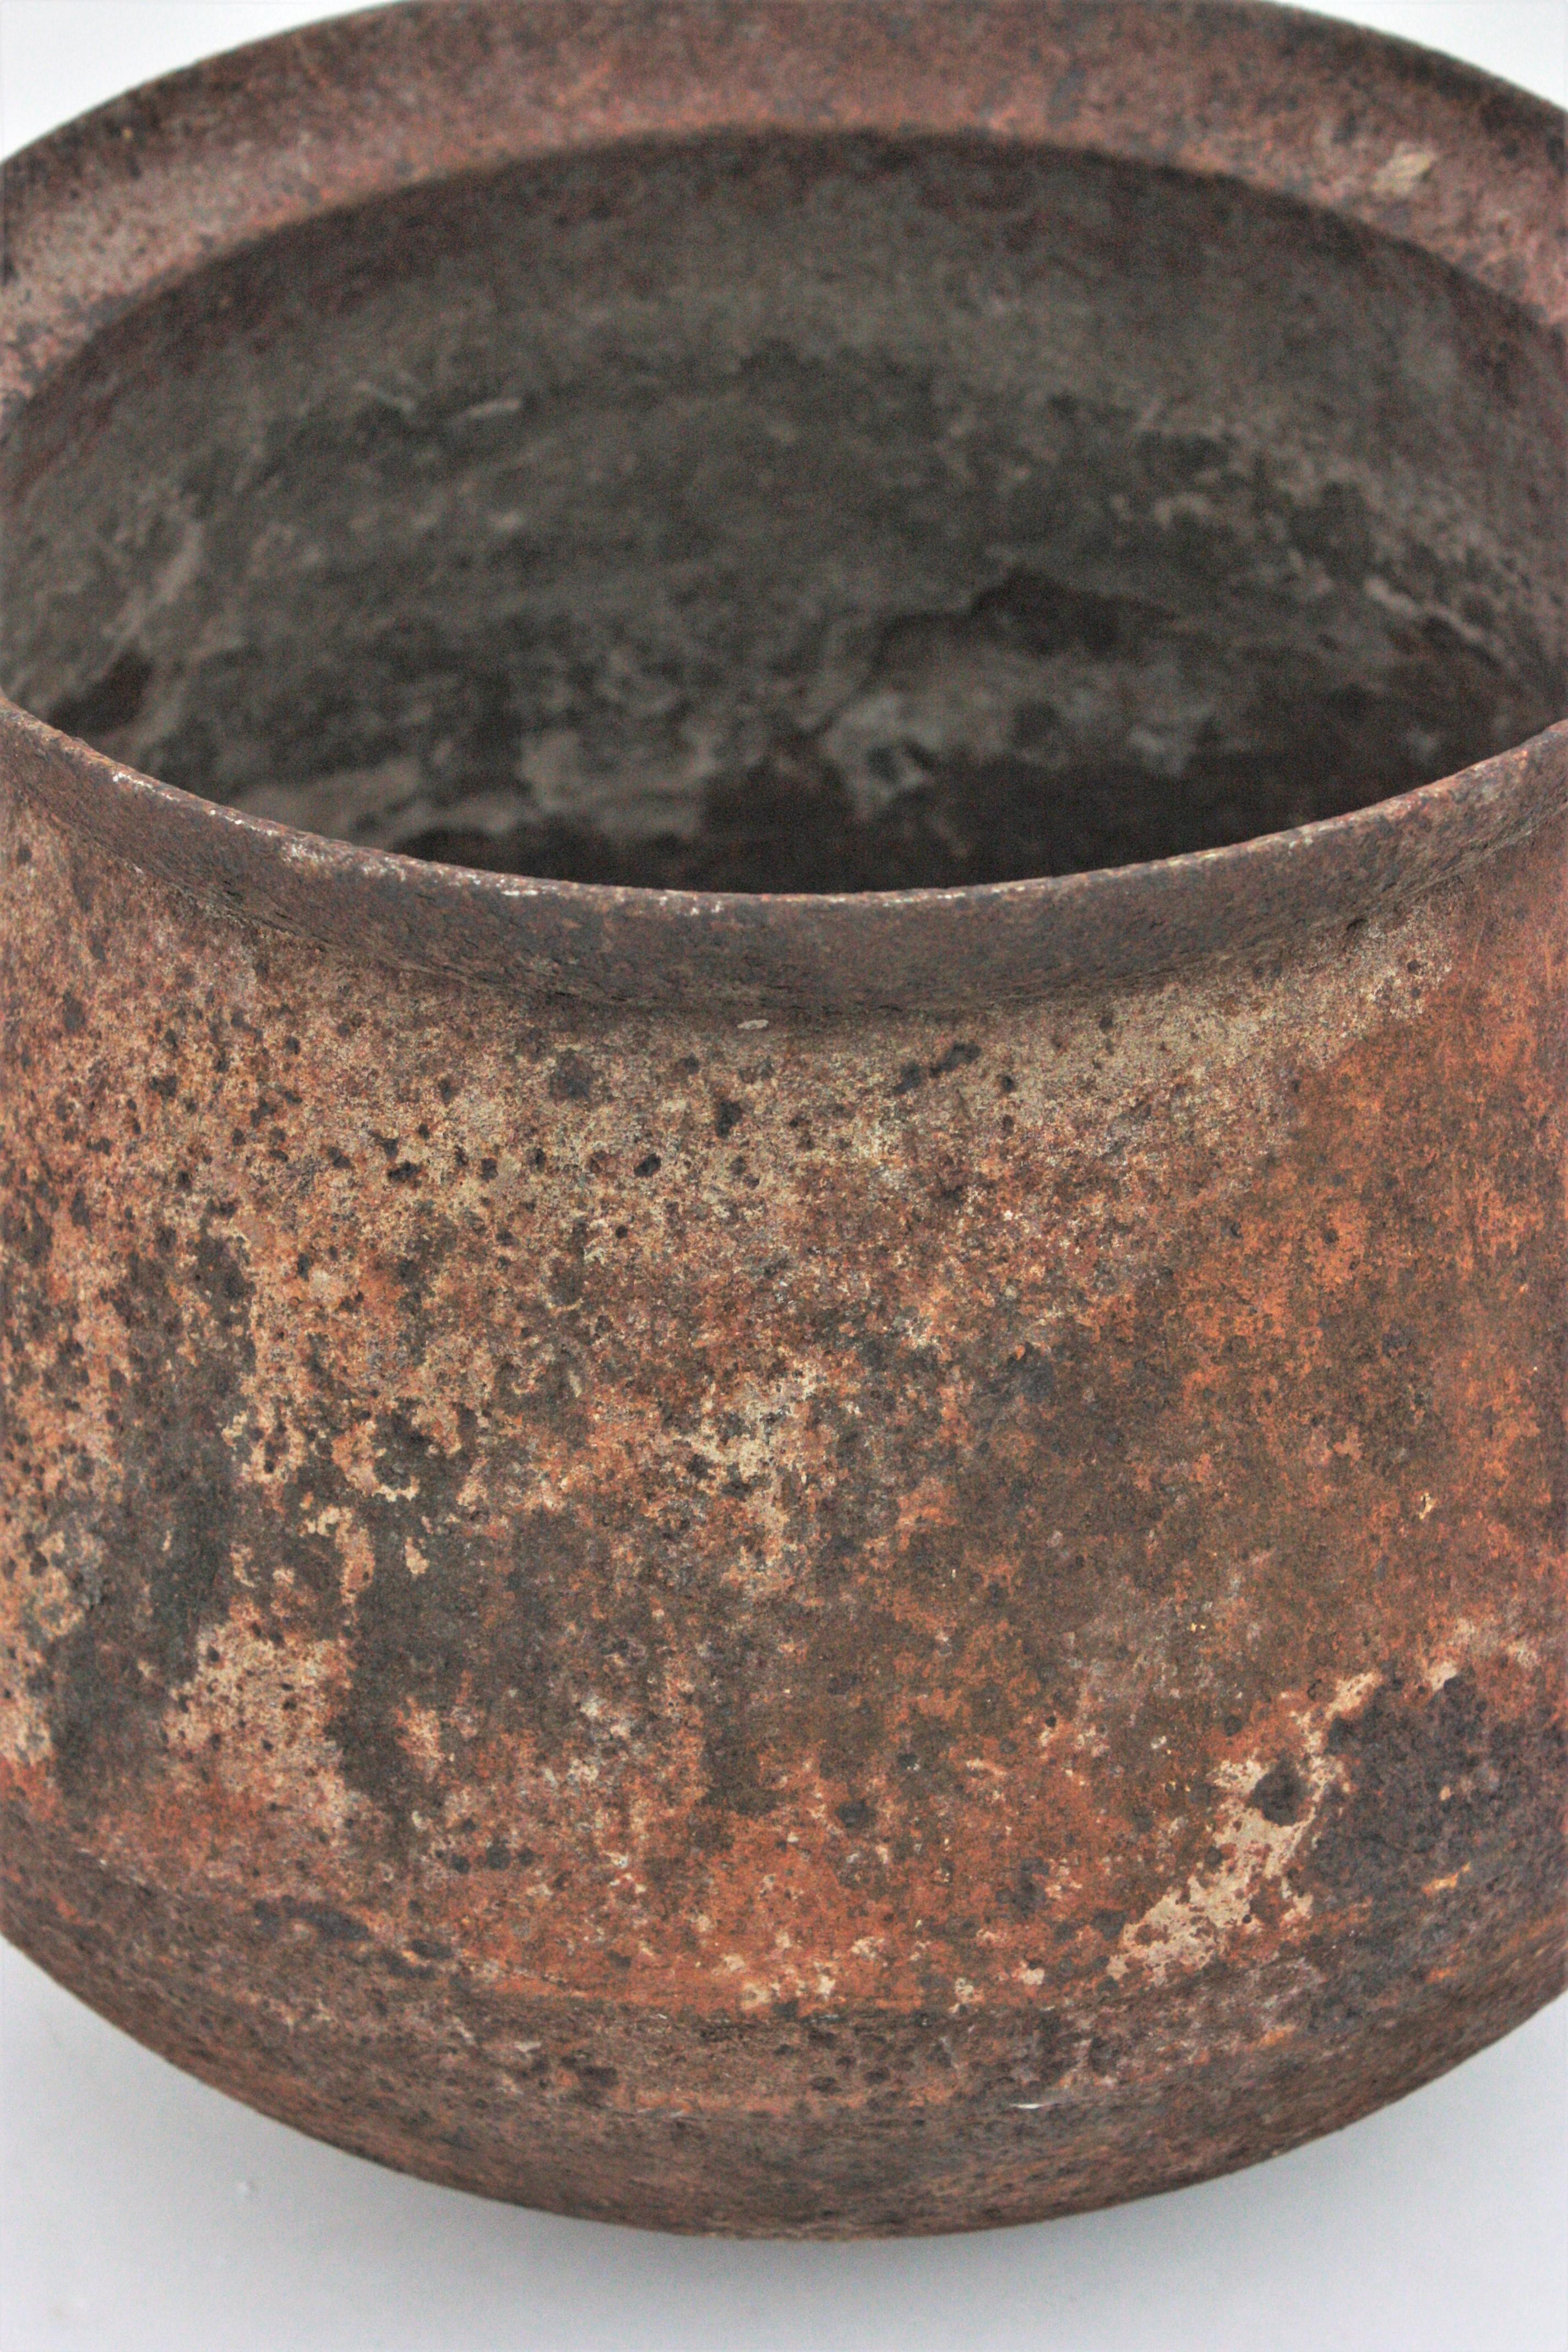 Spanish Rustic Iron Cauldron Pot or Vessel with Rusty Original Patina In Good Condition For Sale In Barcelona, ES